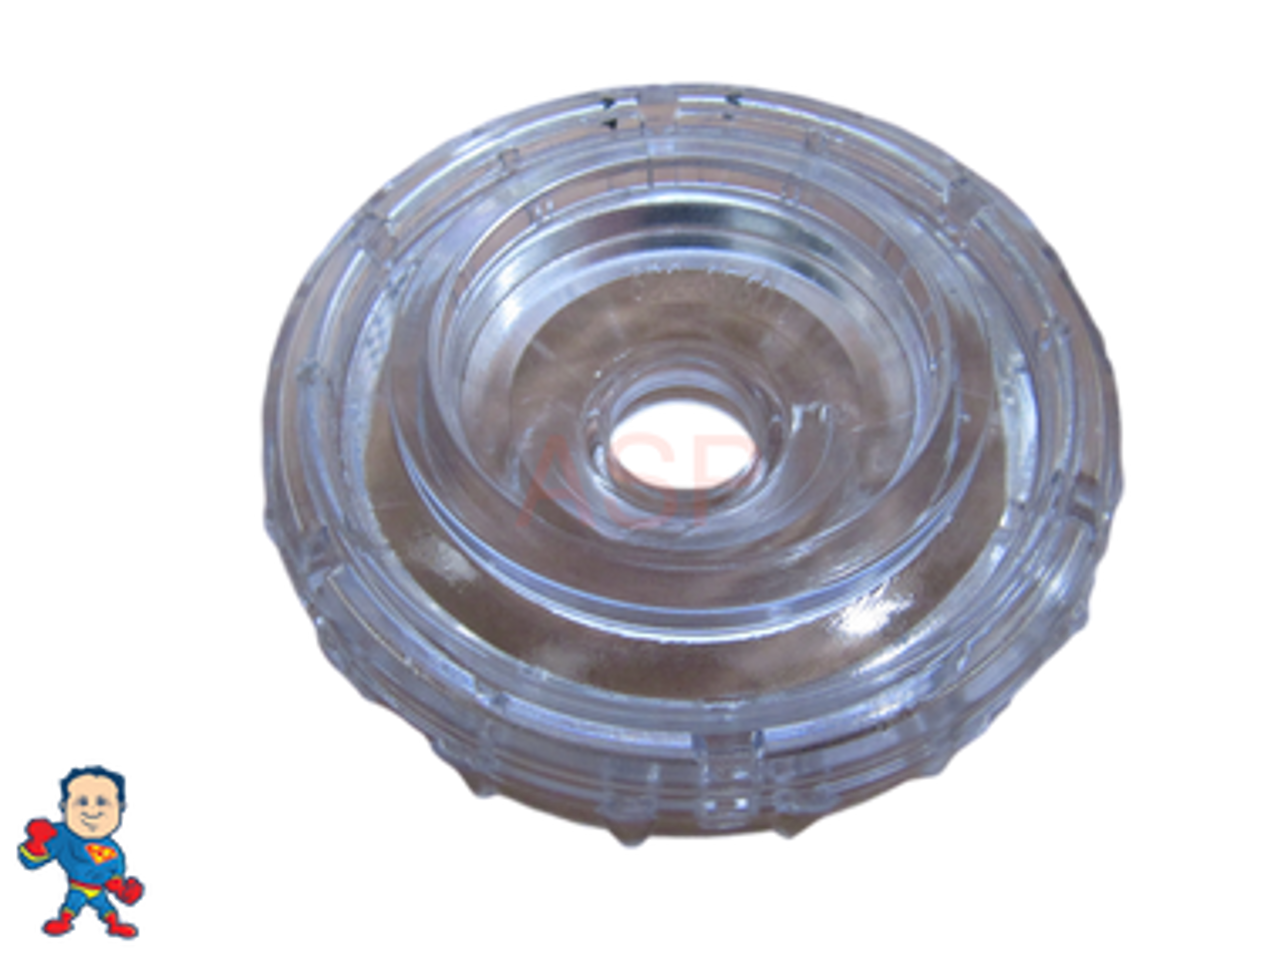 Dynasty Spa Hot Tub Diverter Cap 3 5/8" Wide Clear Orion Thicker 13/16"